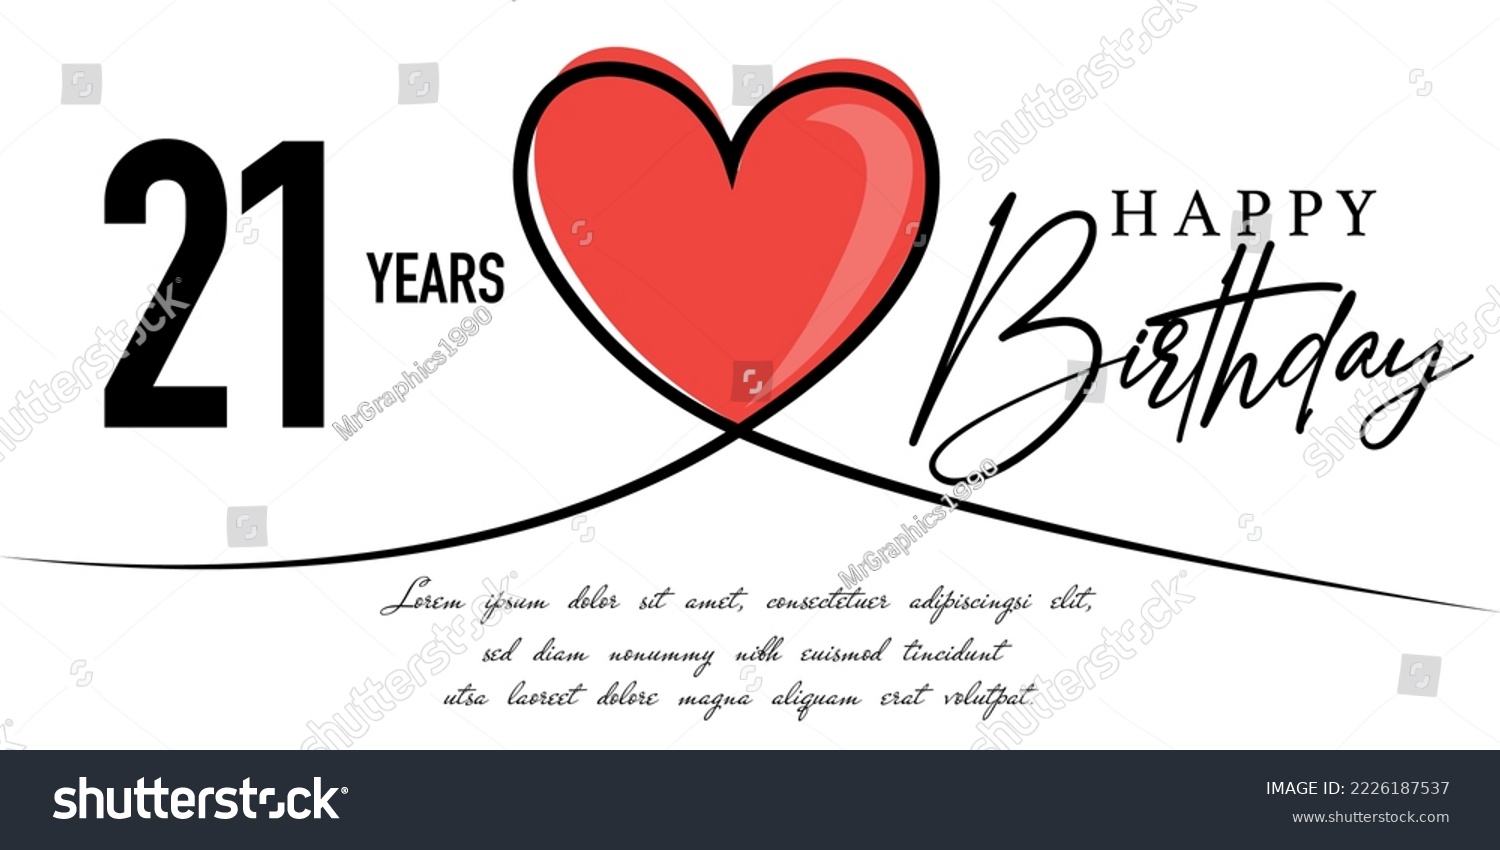 SVG of Happy 21st birthday card vector template with lovely heart shape.
 svg